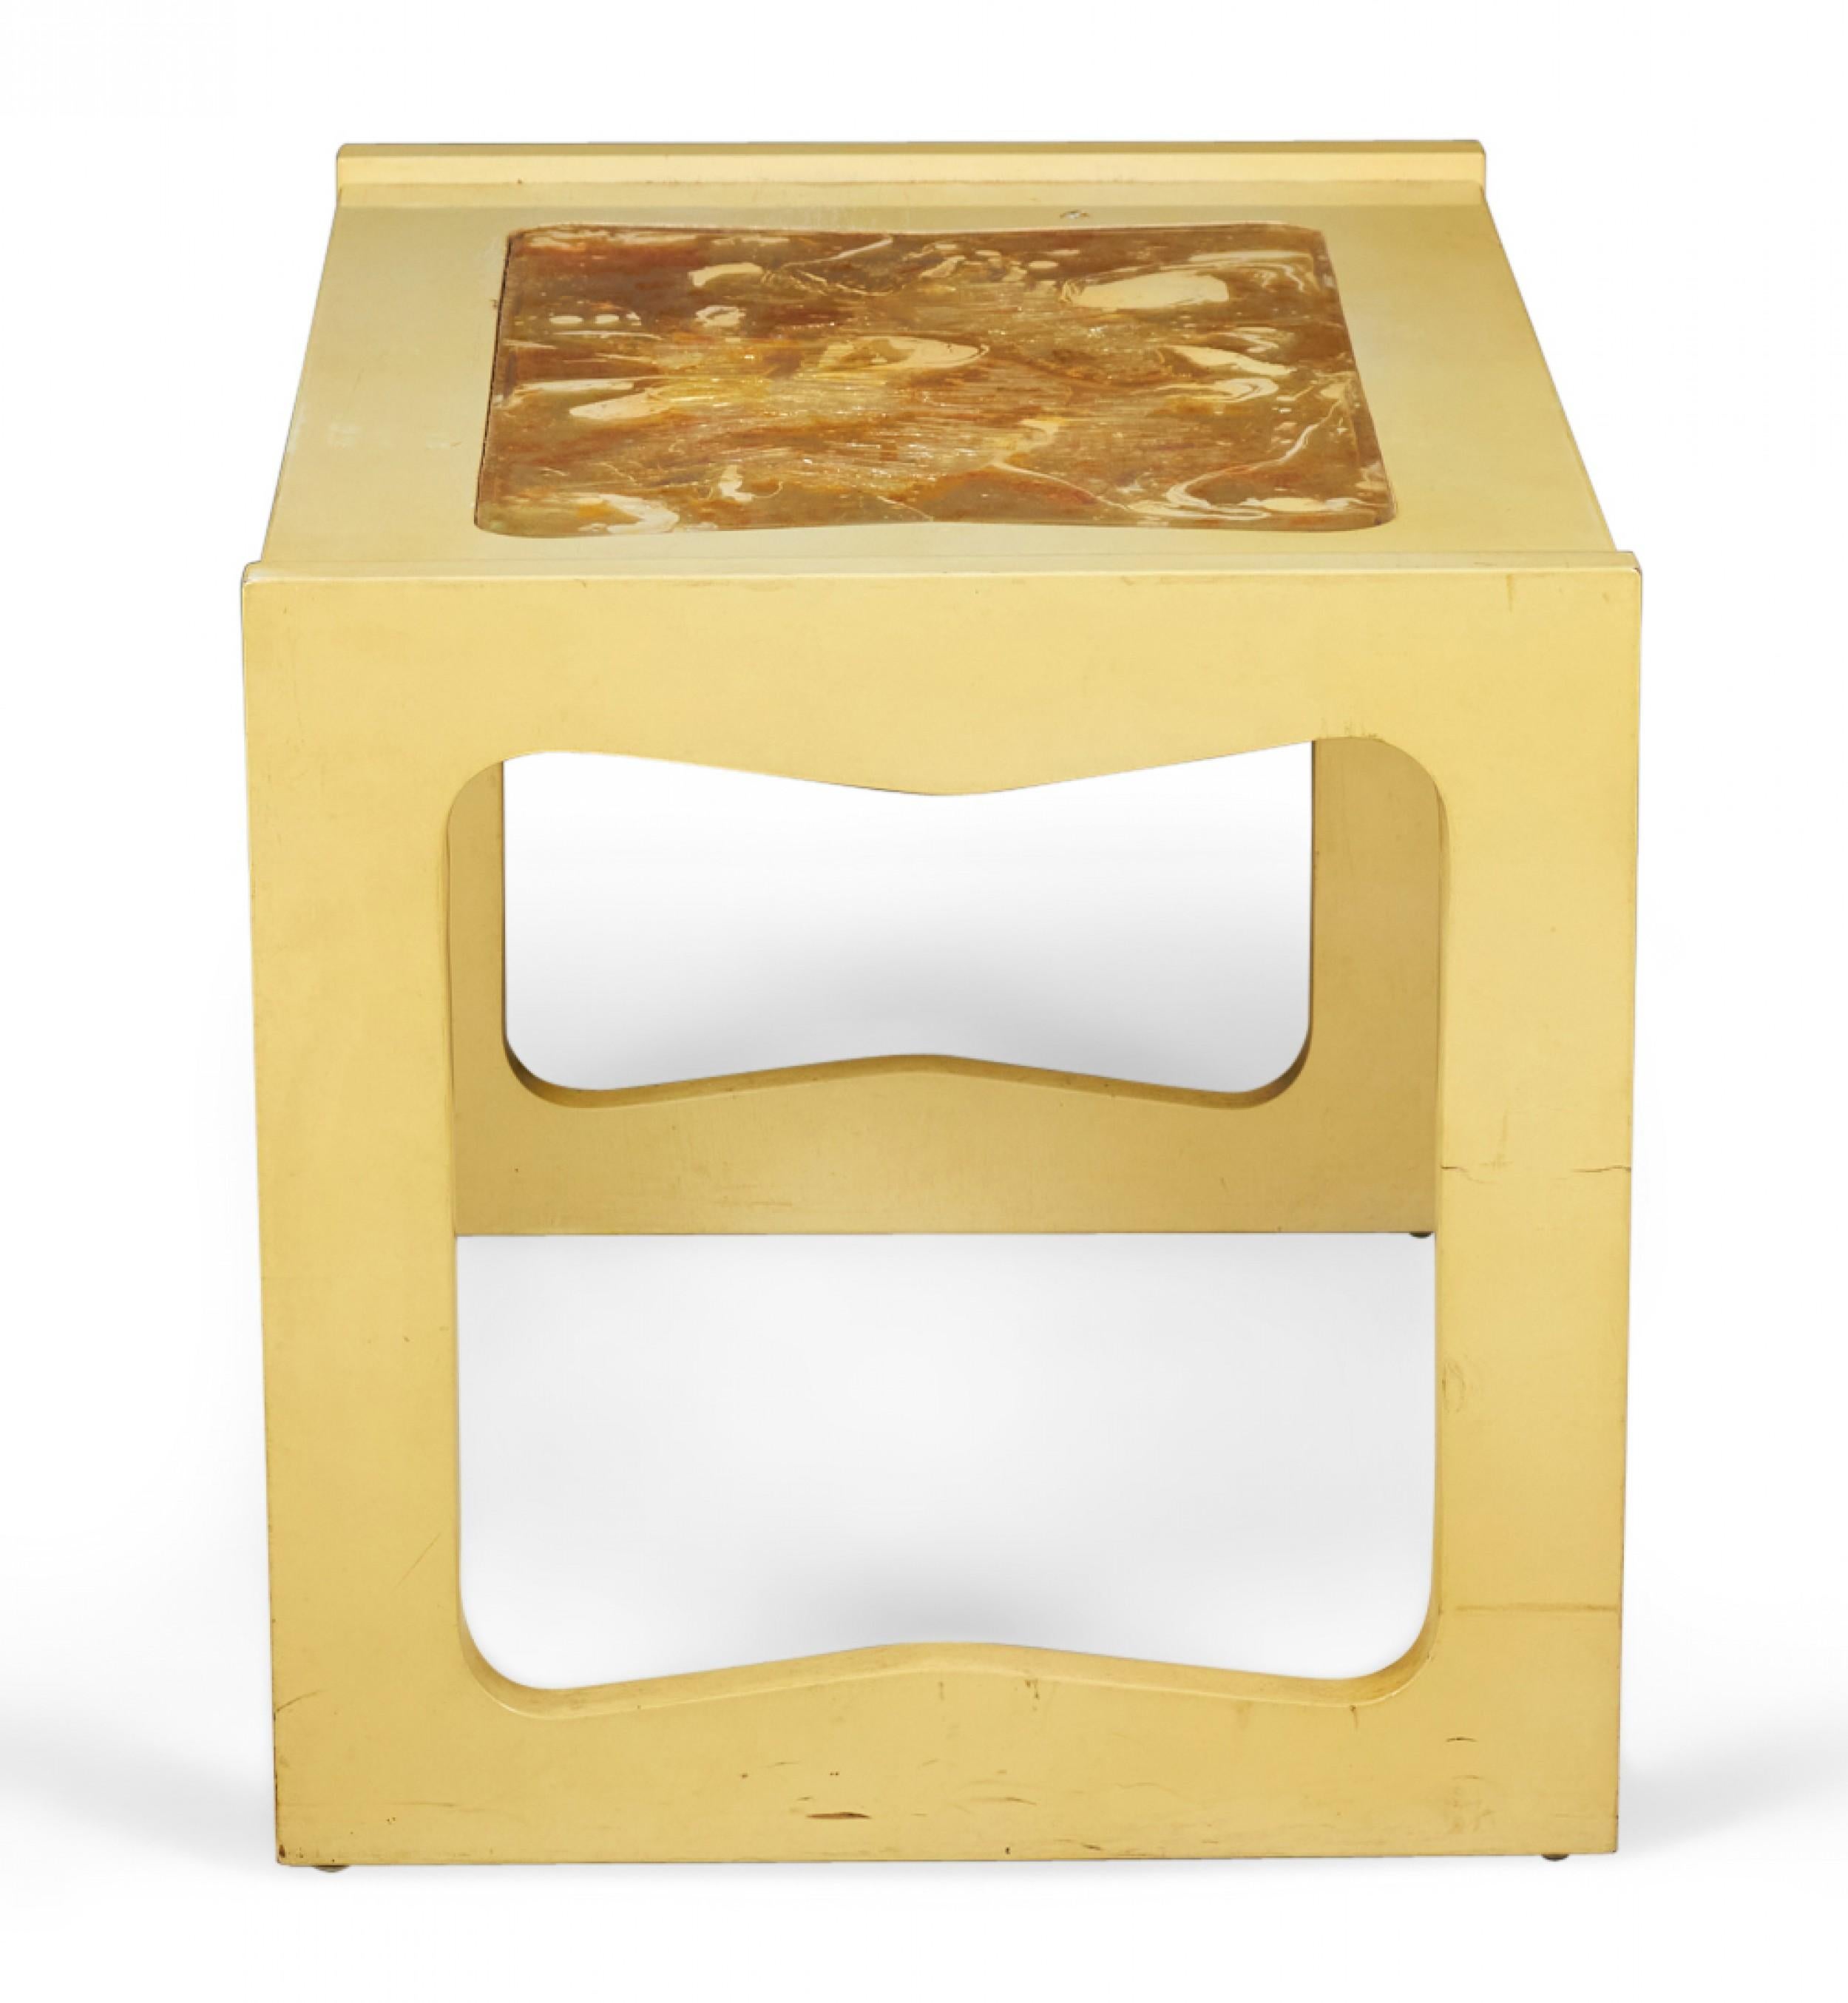 Mid-Century Modern end / side table with a beige painted wooden frame and rectangular top with an inset abstract gold, red, and orange resin center, supported on either side by two square legs with scalloped interiors. (PAUL LASZLO FOR BROWN SALTMAN)